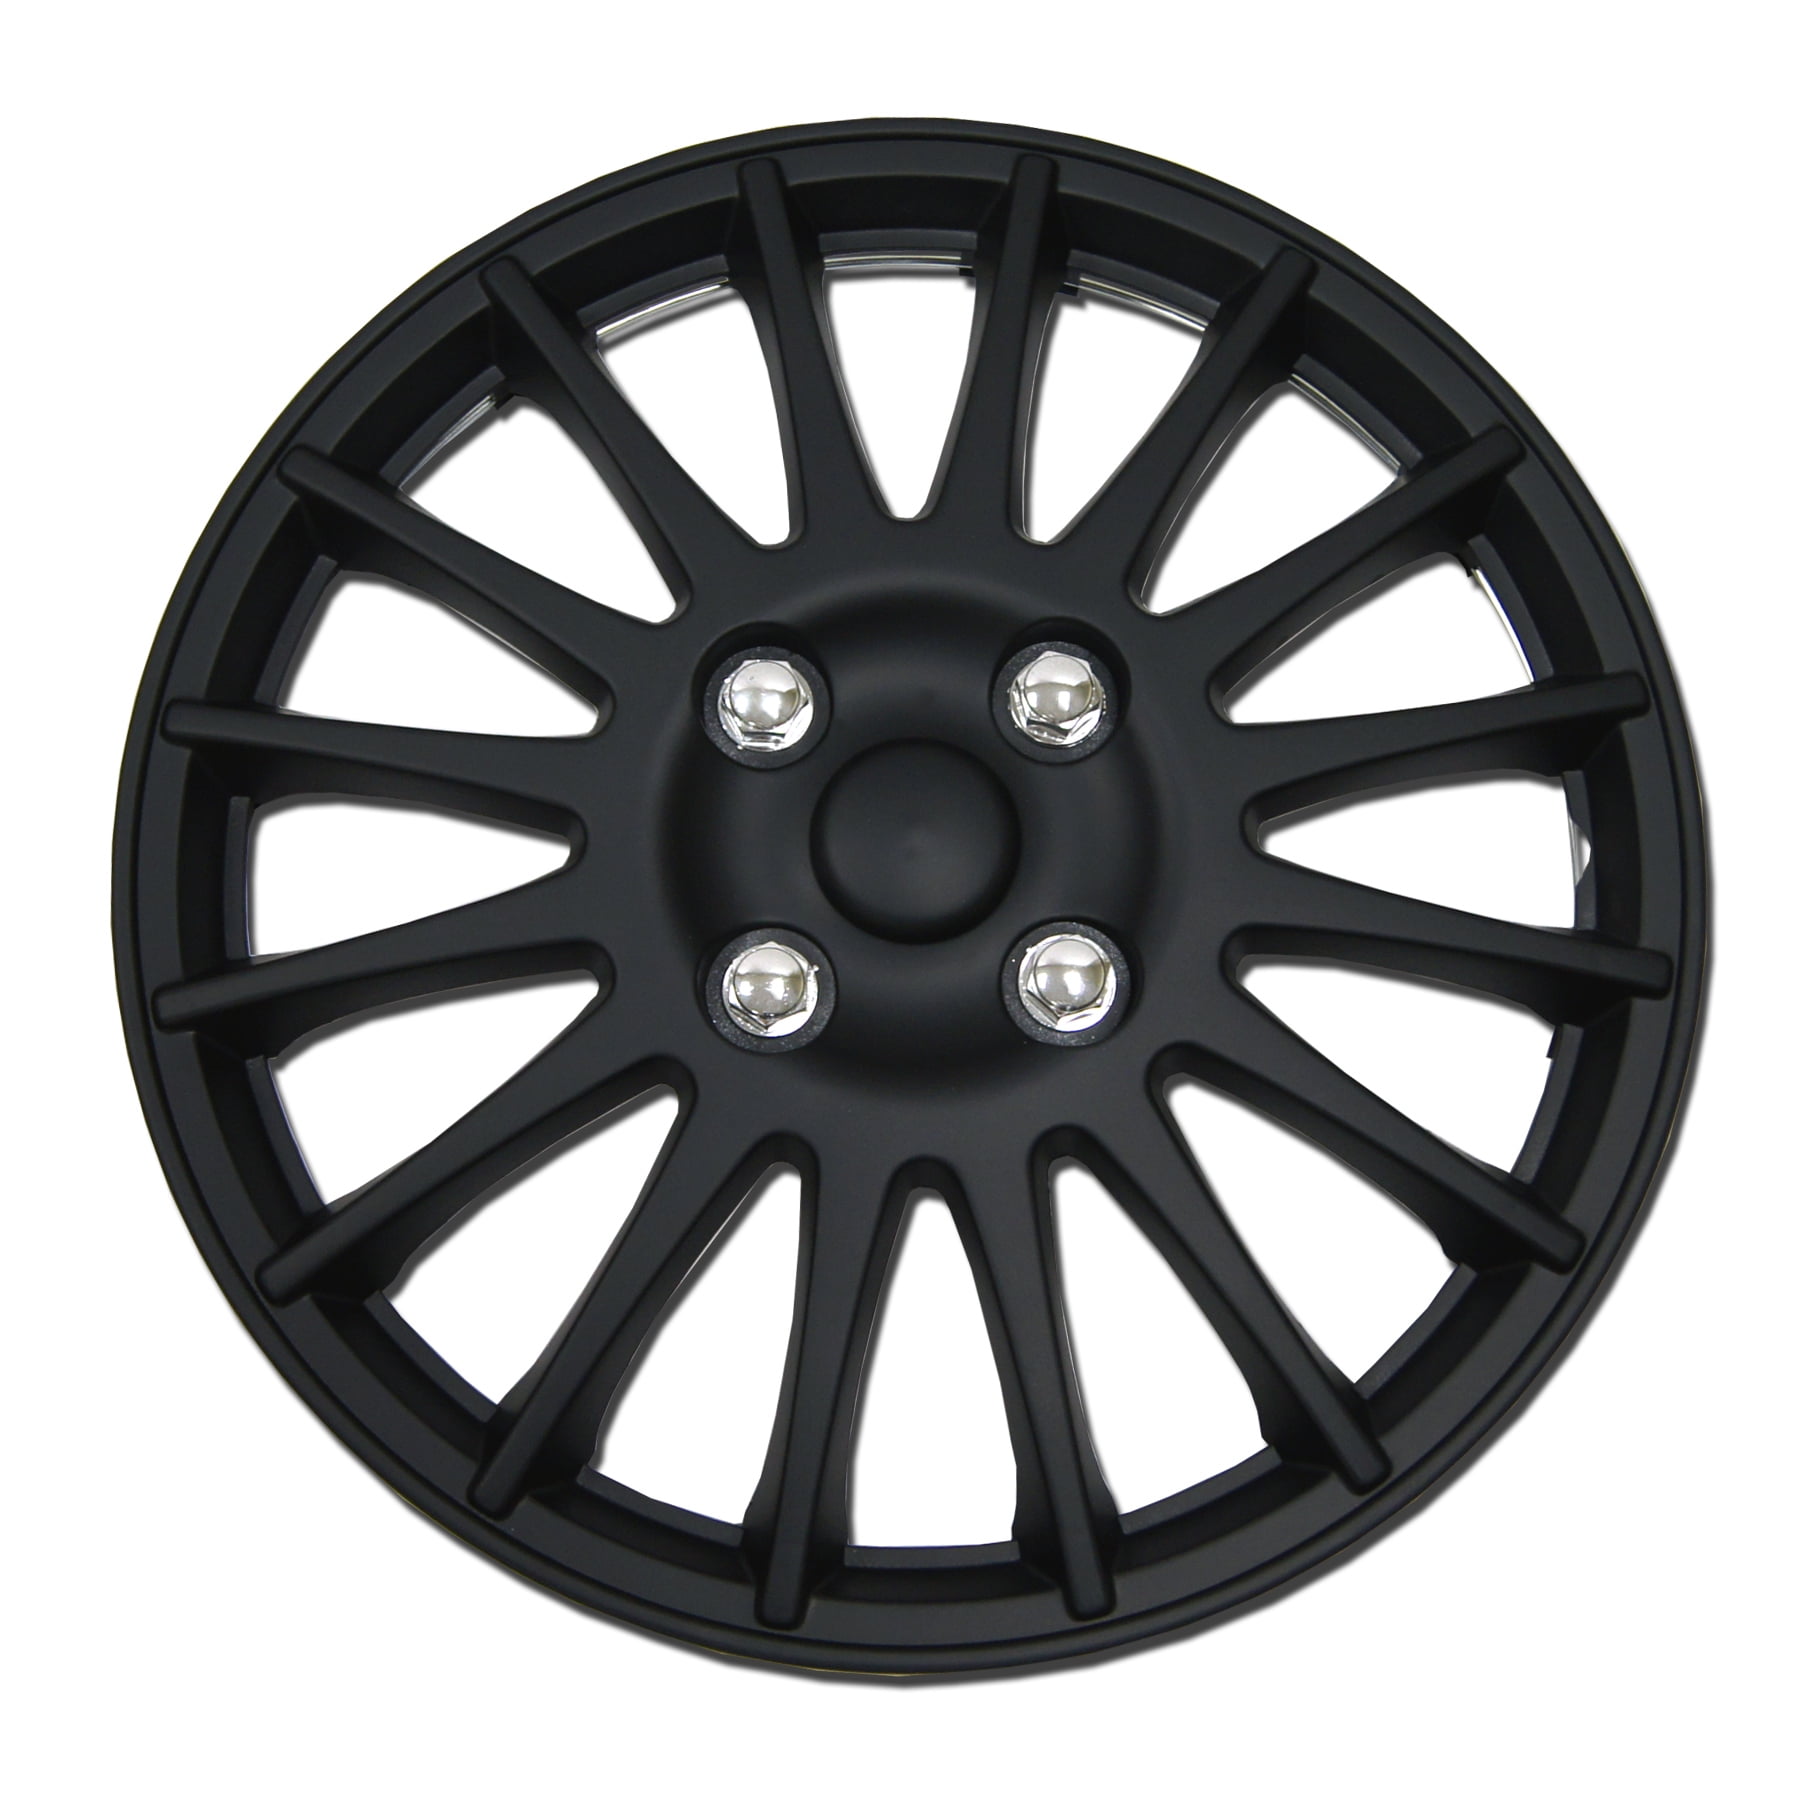 Pop-On 15-Inches Matte Black Hubcaps Wheel Cover TuningPros WSC3-613B15 4pcs Set Snap-On Type 